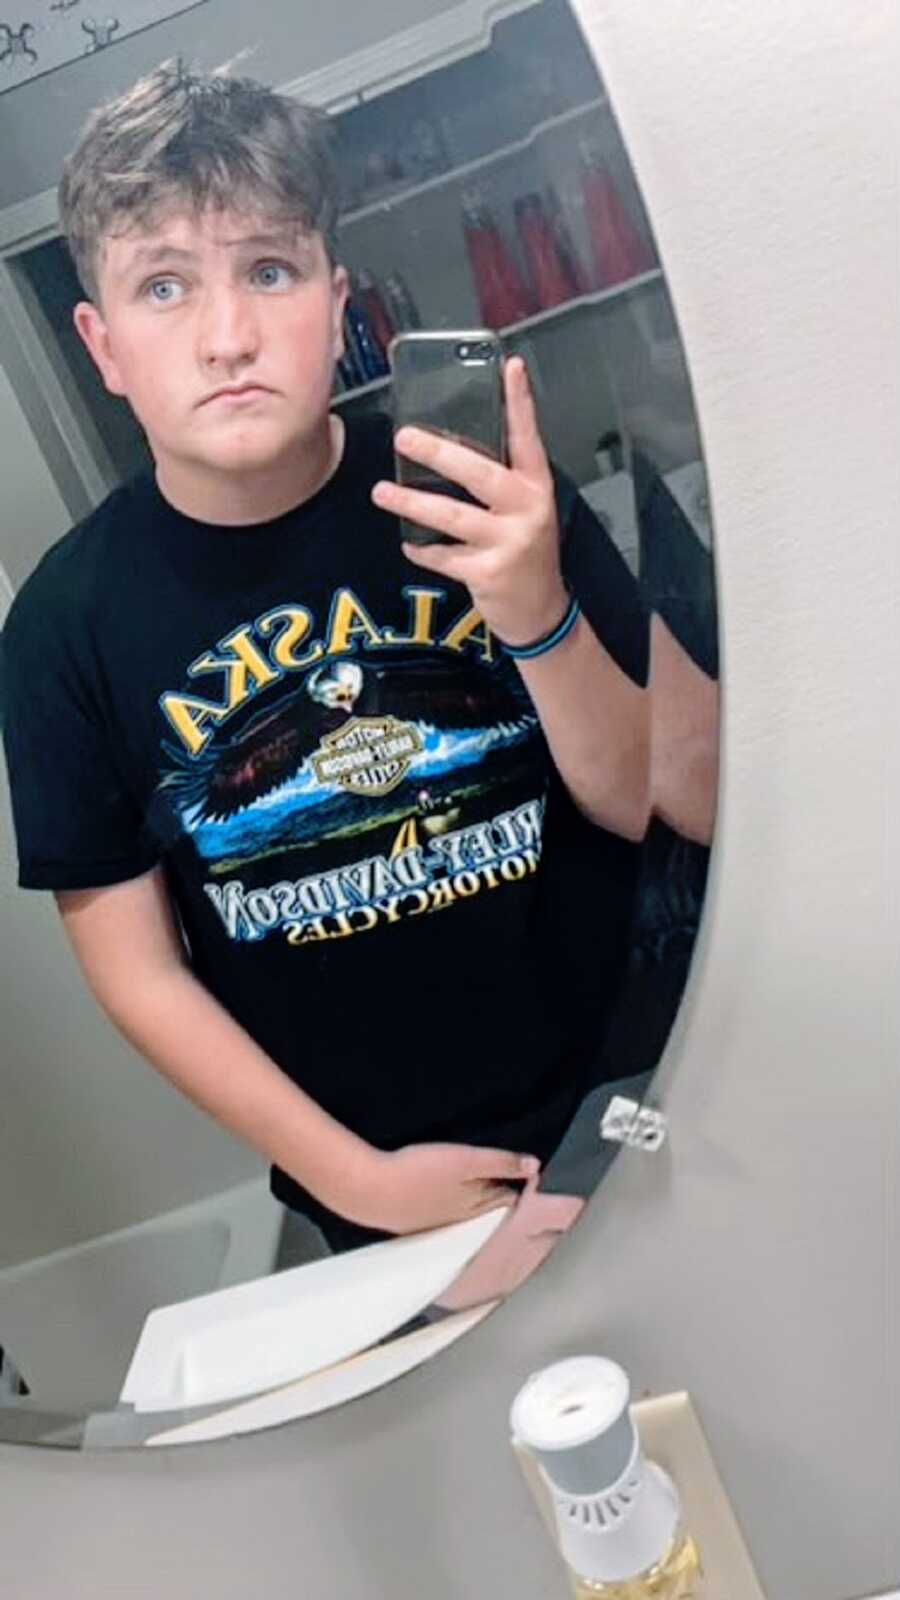 A boy who committed suicide takes a photo of himself in the bathroom mirror